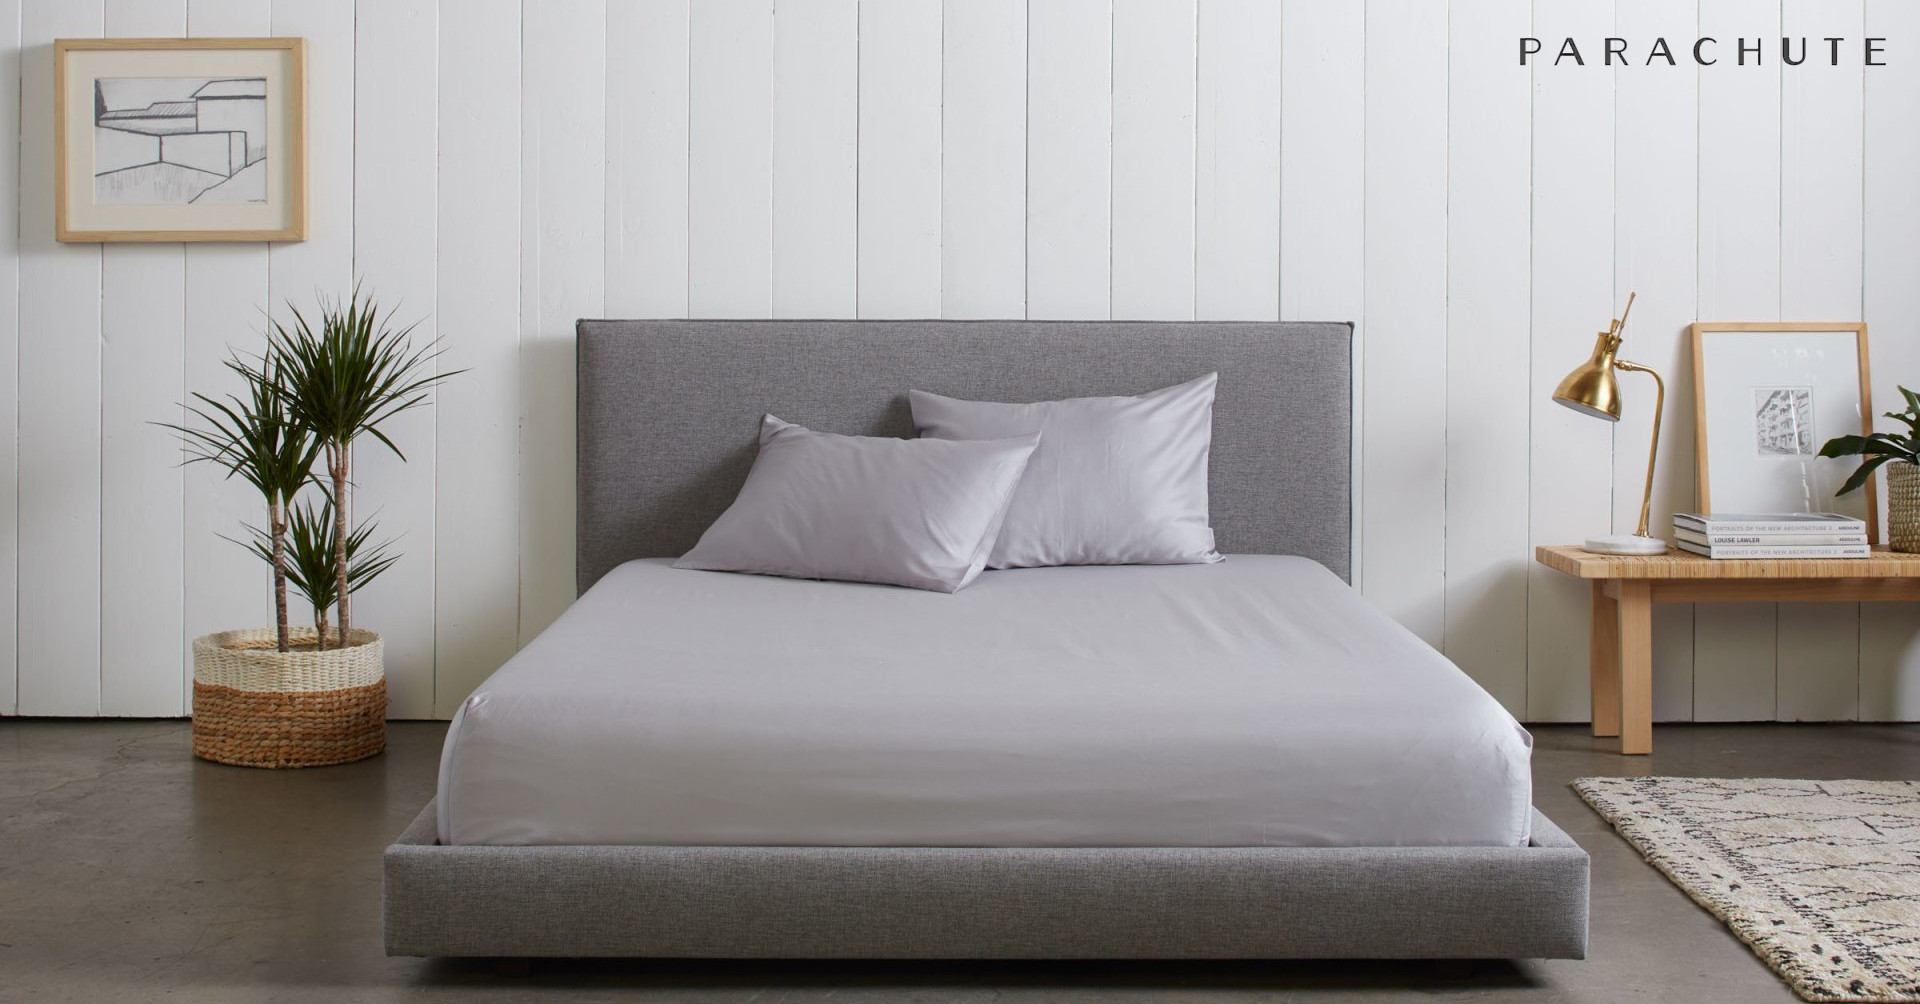 overall thought on the sateen bedding